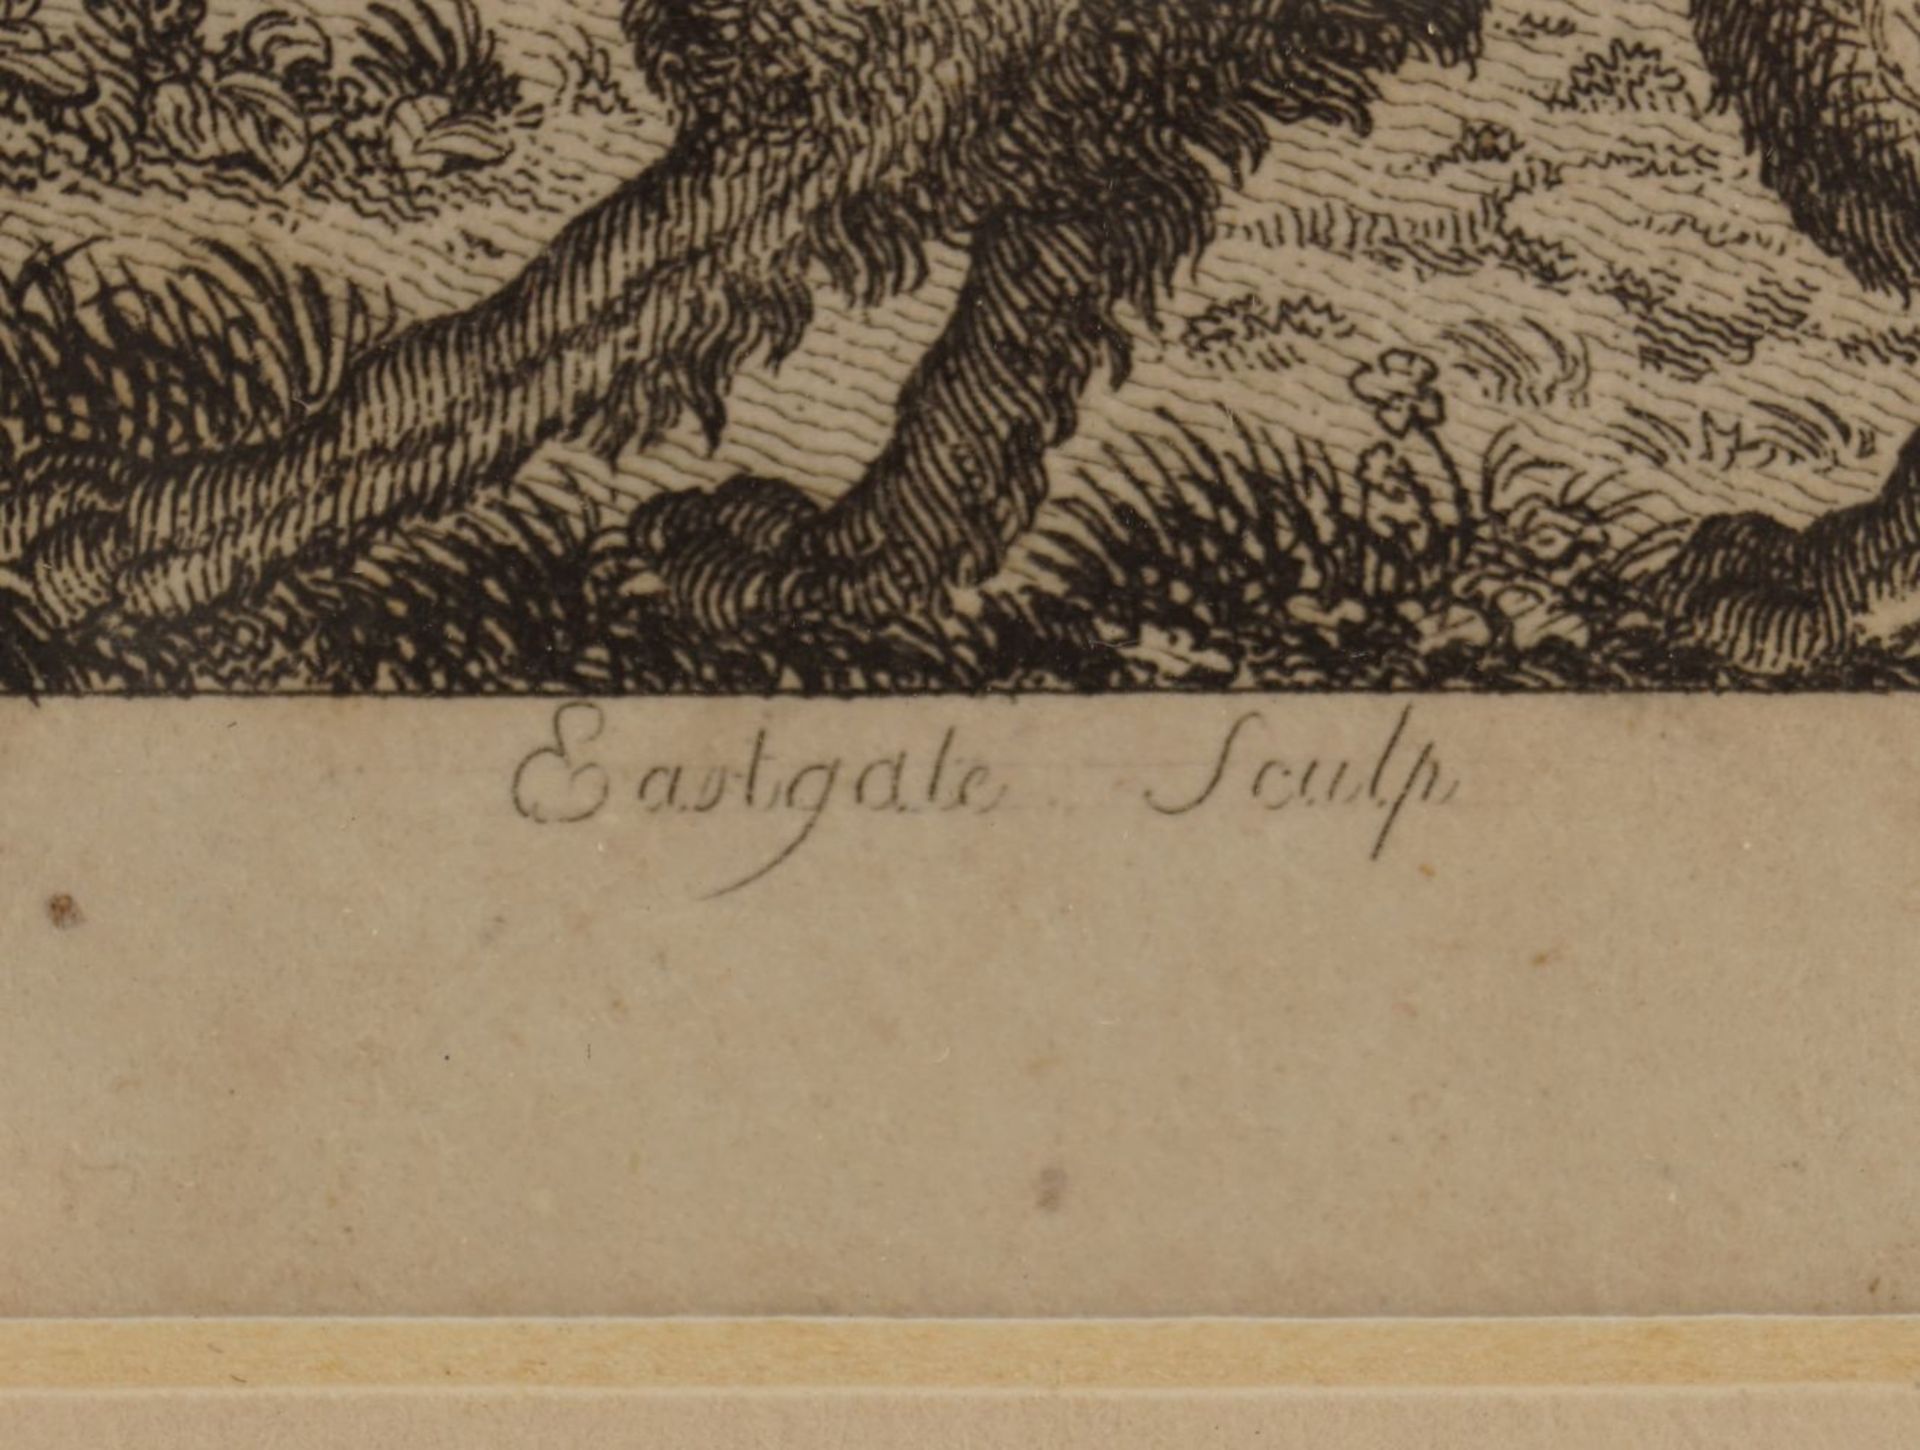 STIPPLE ENGRAVING, LATE 18TH-CENTURY - Image 3 of 3